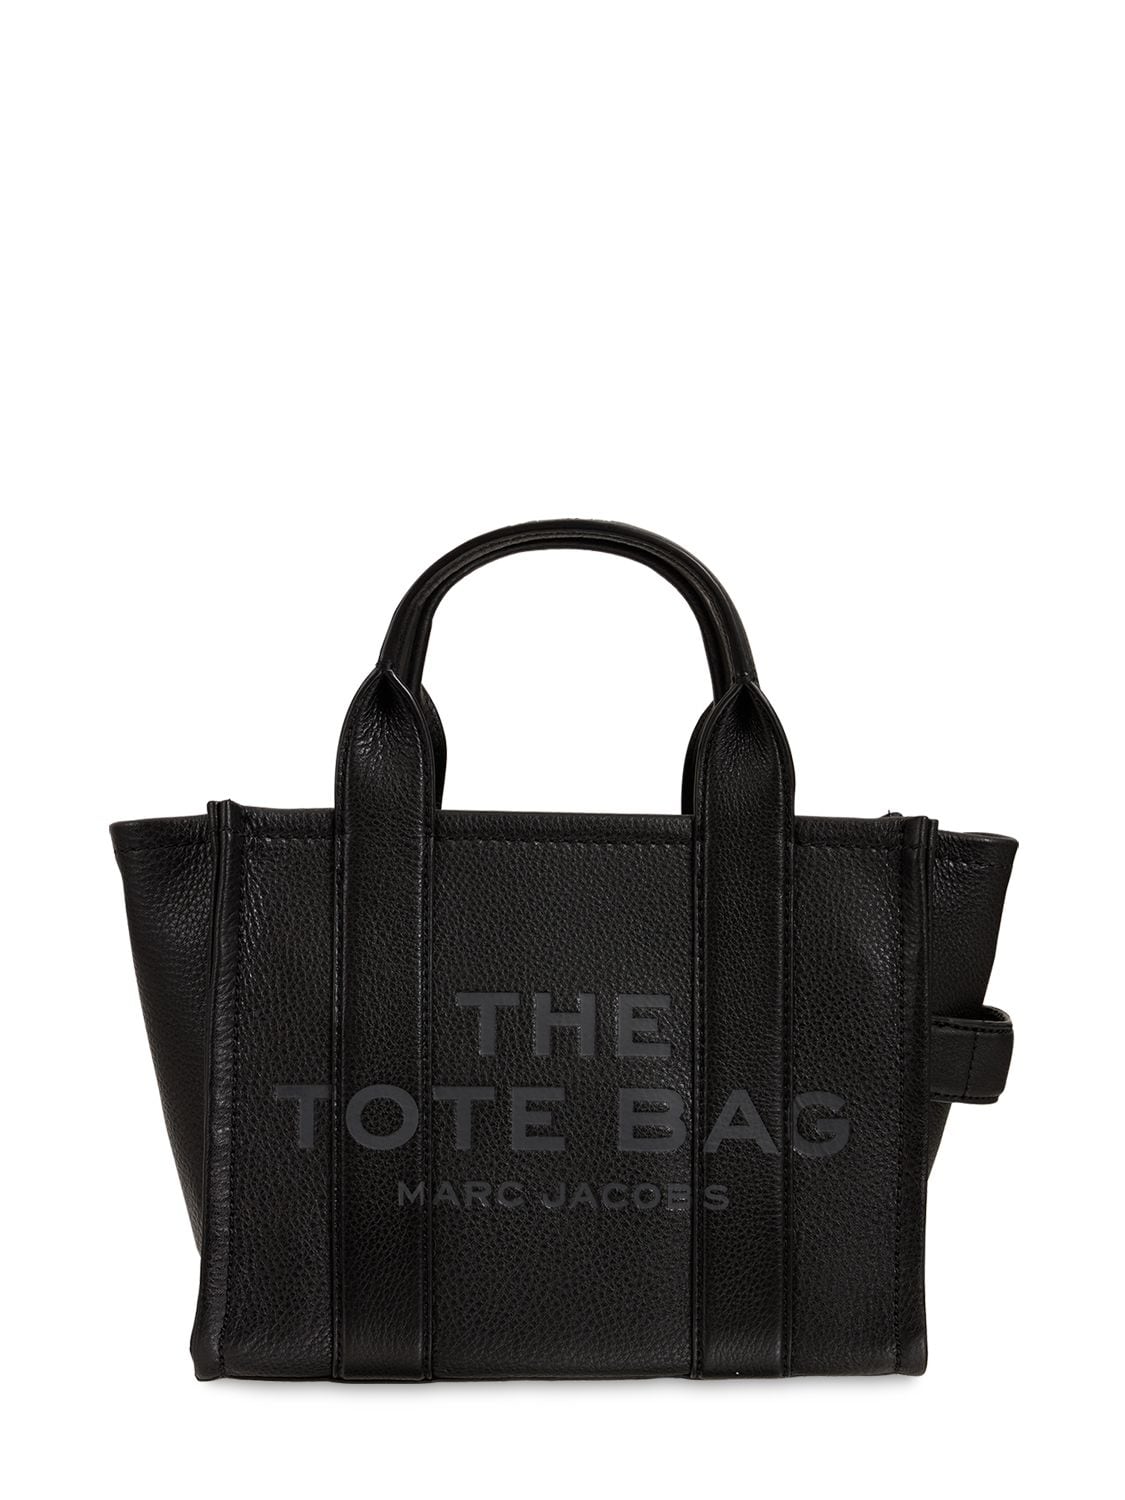 MARC JACOBS (THE) The Mini Tote Leather Bag